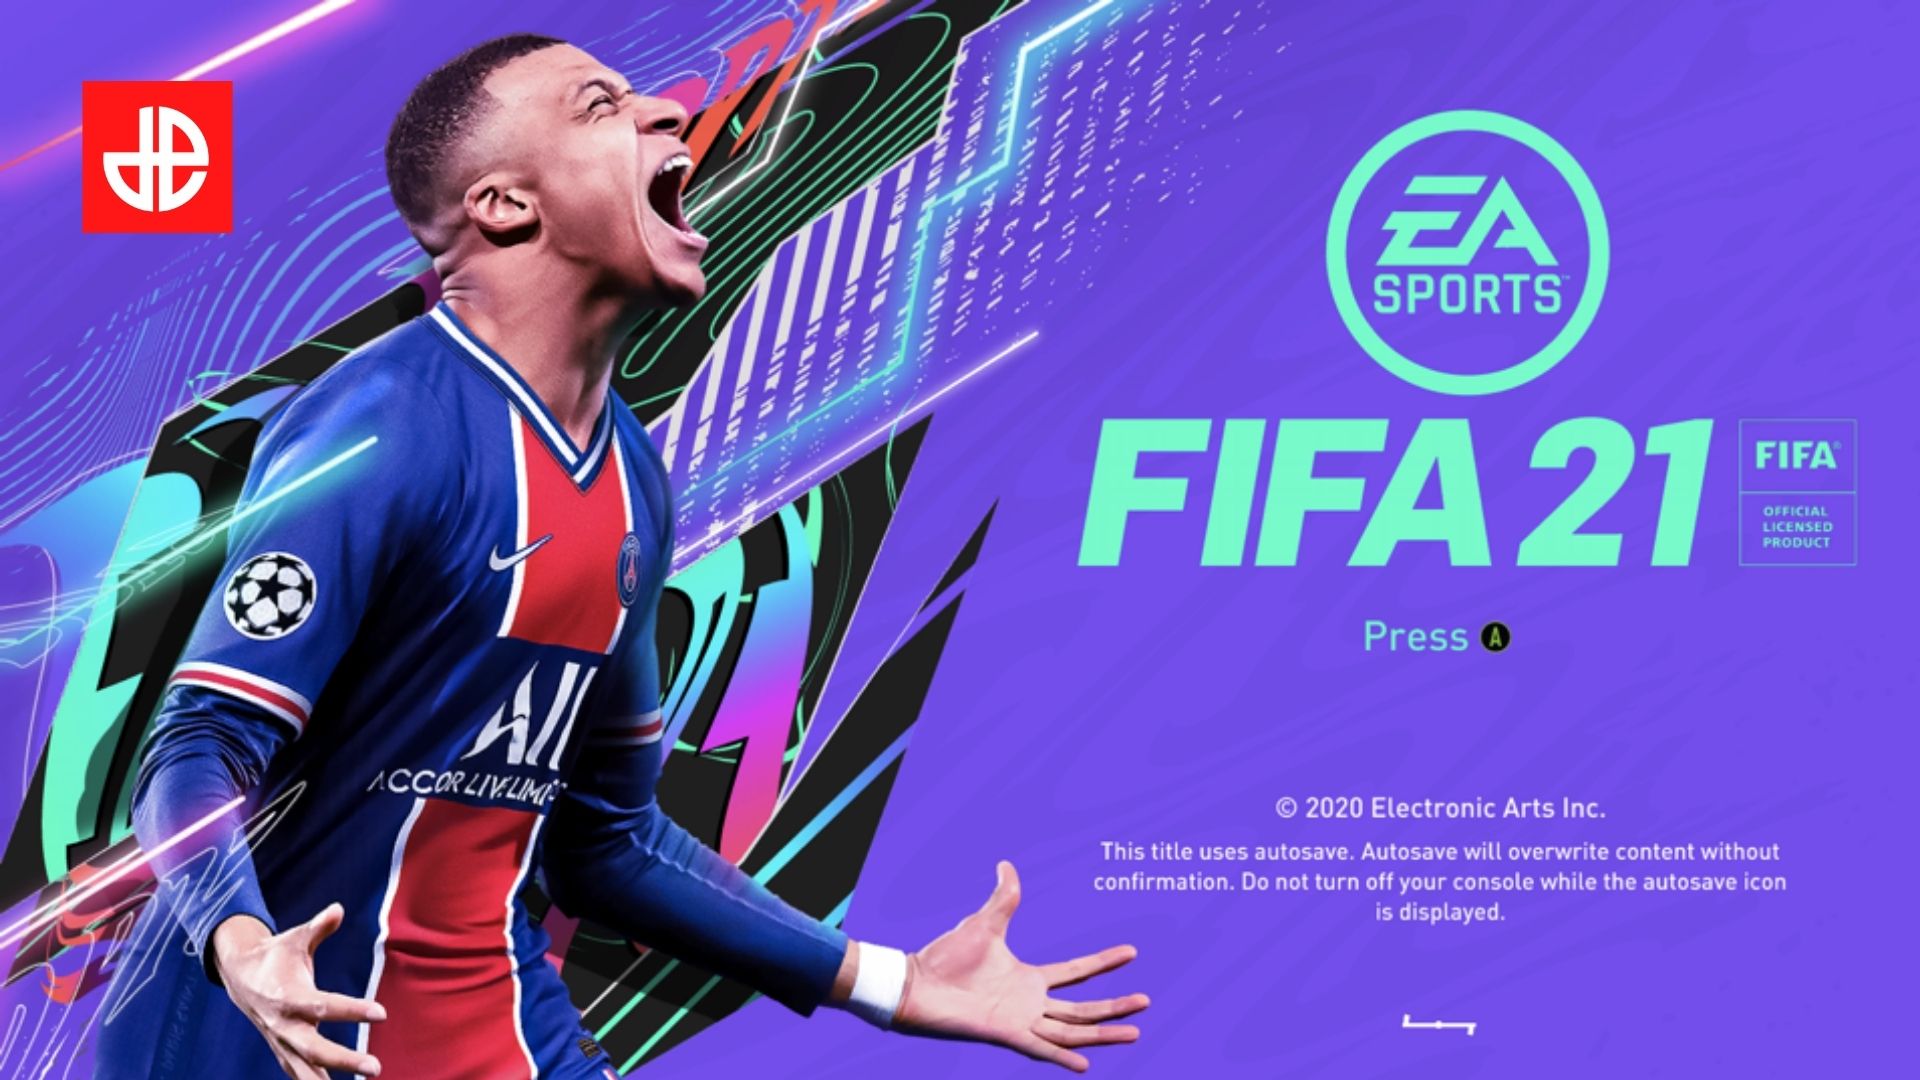 FIFA 21 - How to Earn Coins Fast - SAMURAI GAMERS